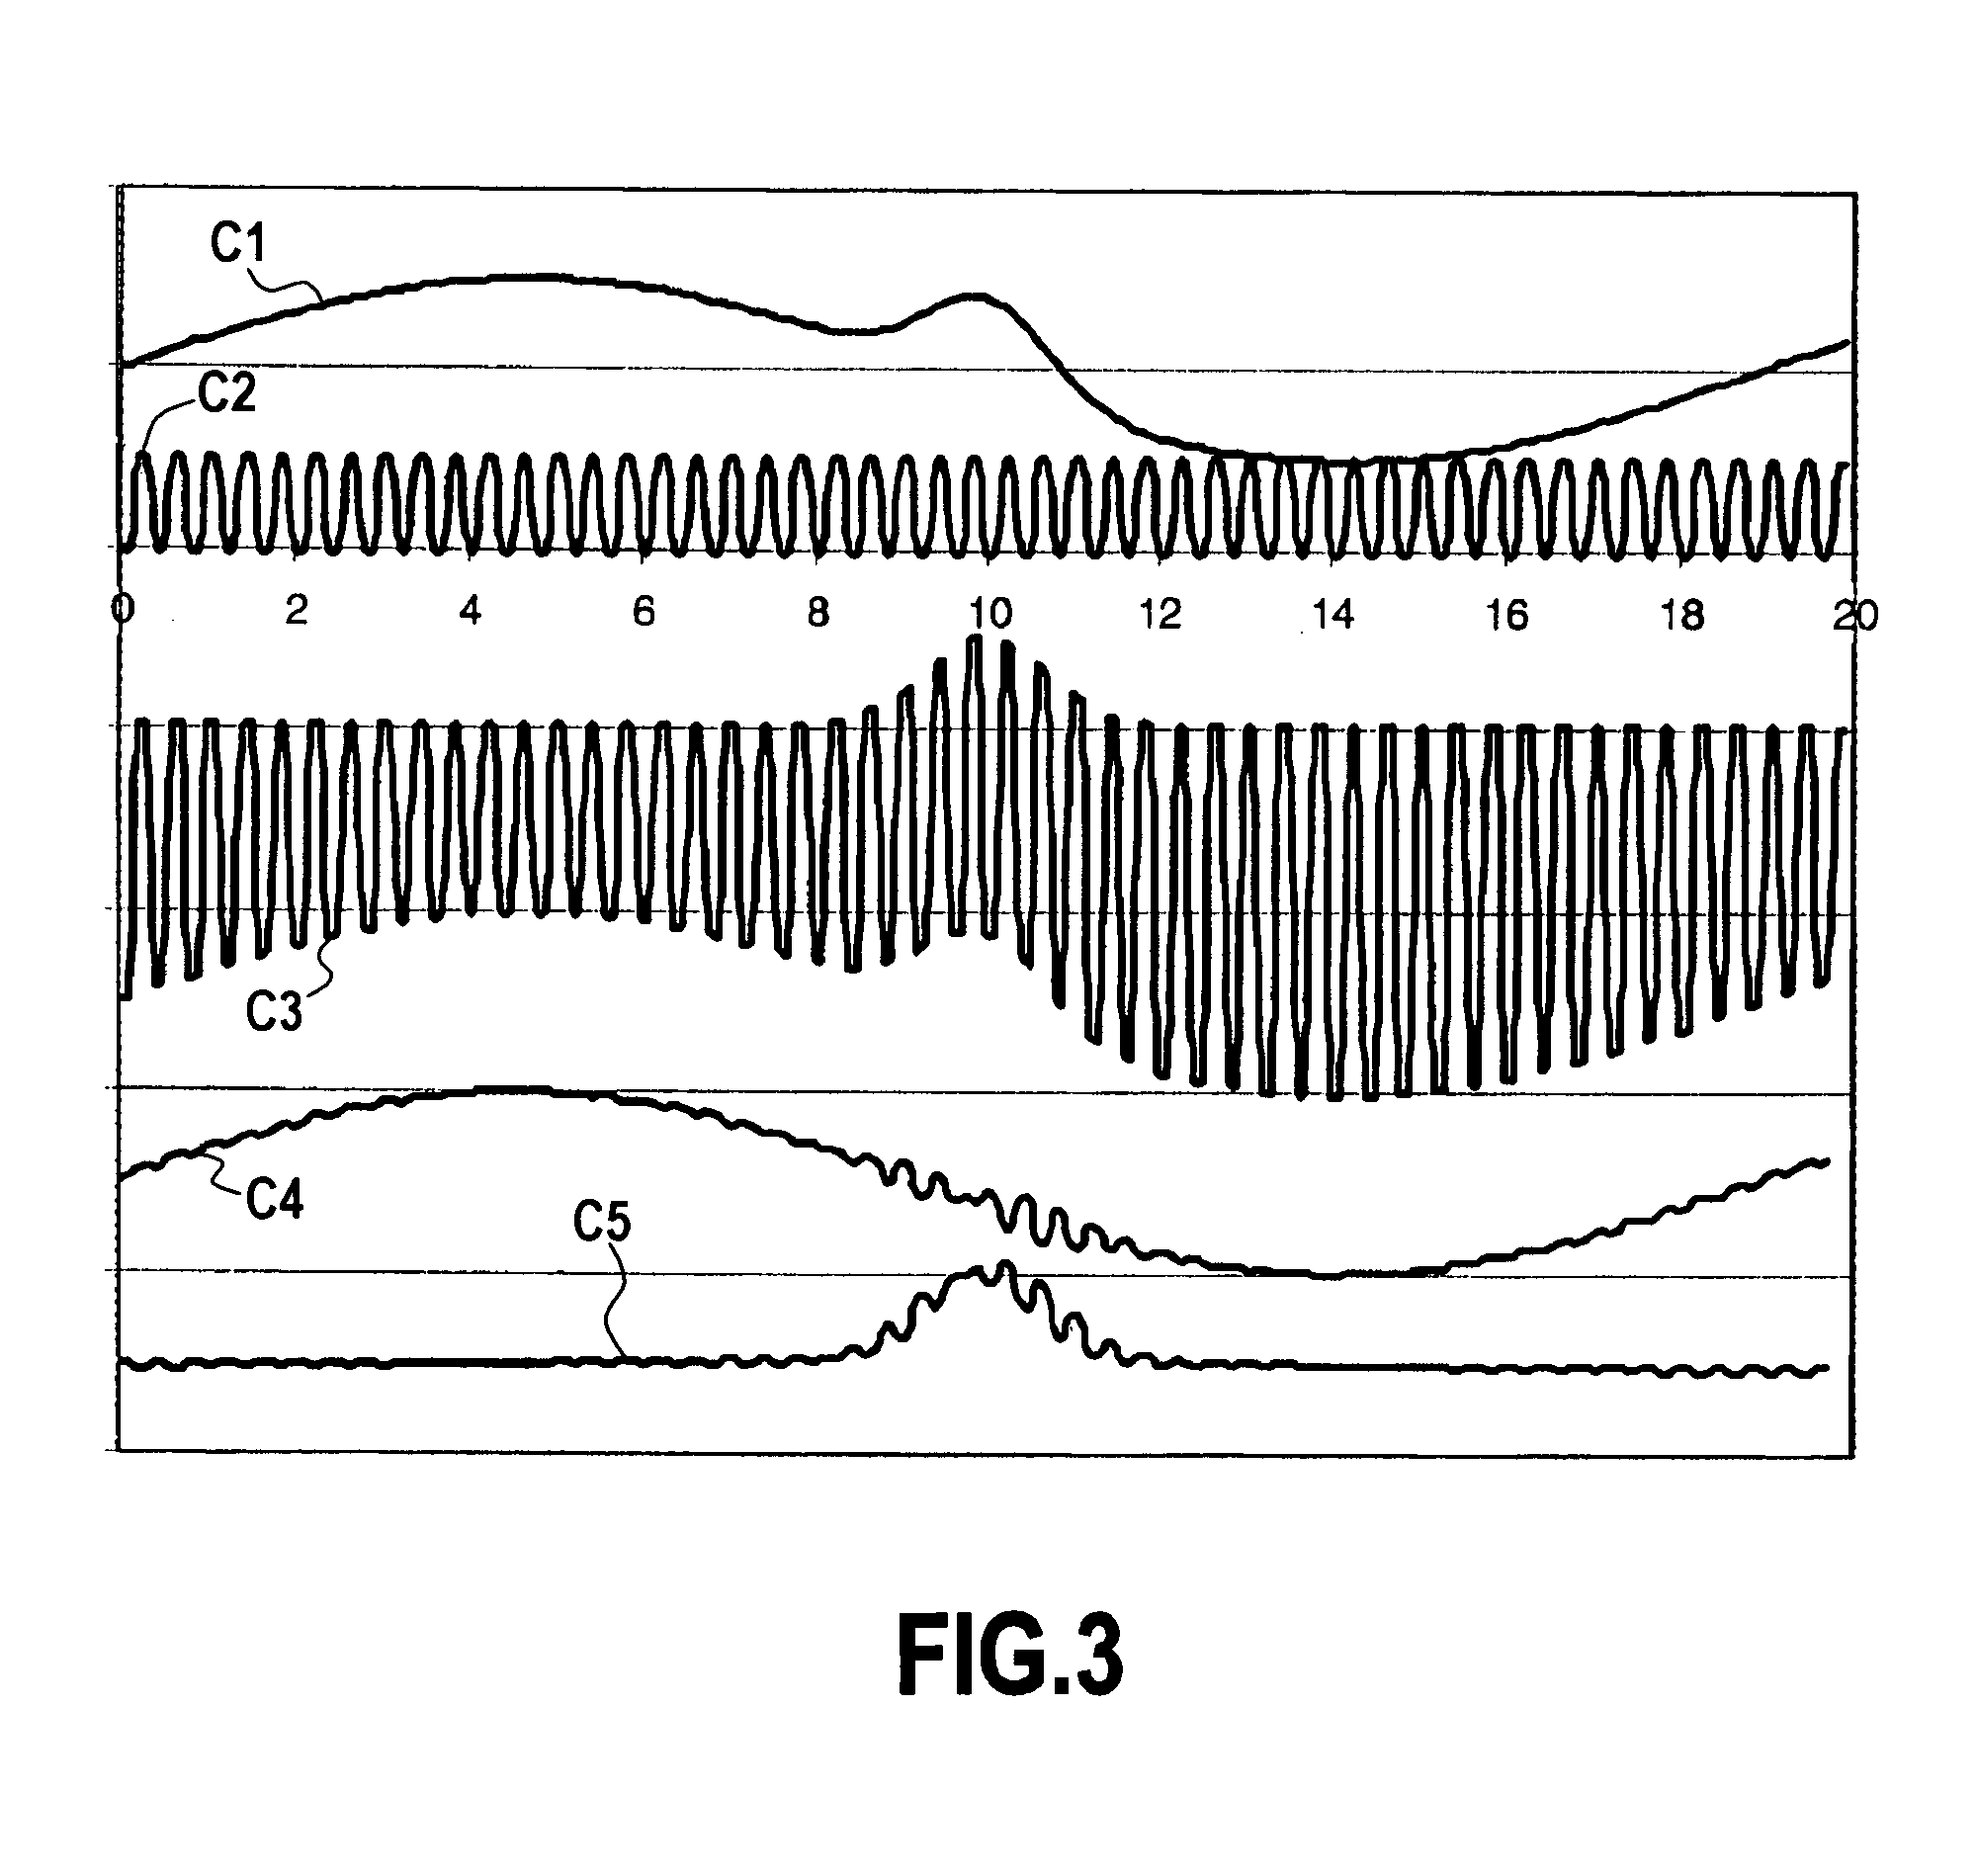 Method for low frequency noise cancellation in magneto-resistive mixed sensors